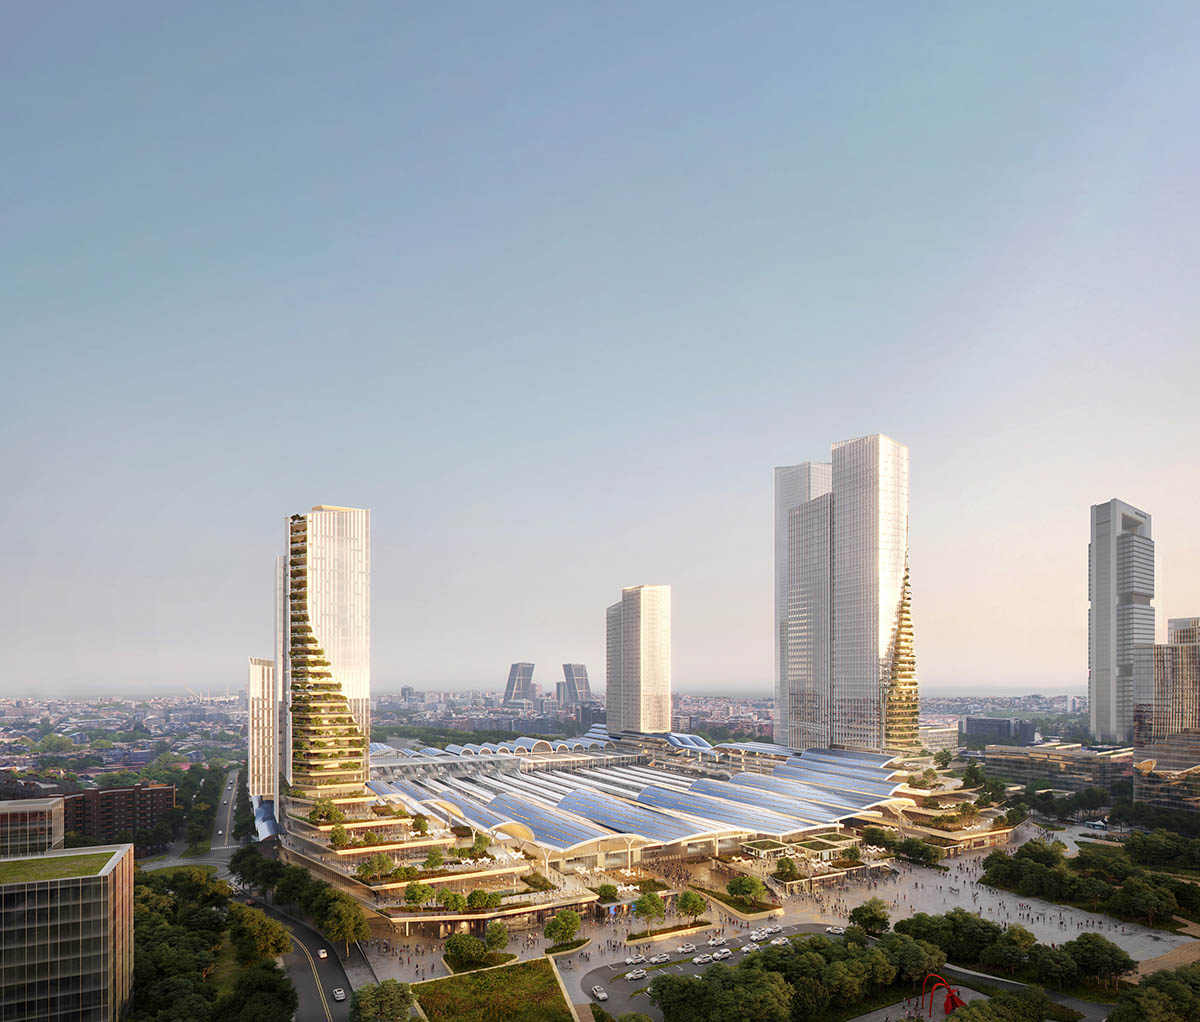 UNStudio and b720 Arquitectura win competition to remodel Madrid-Chamartín Station in Spain